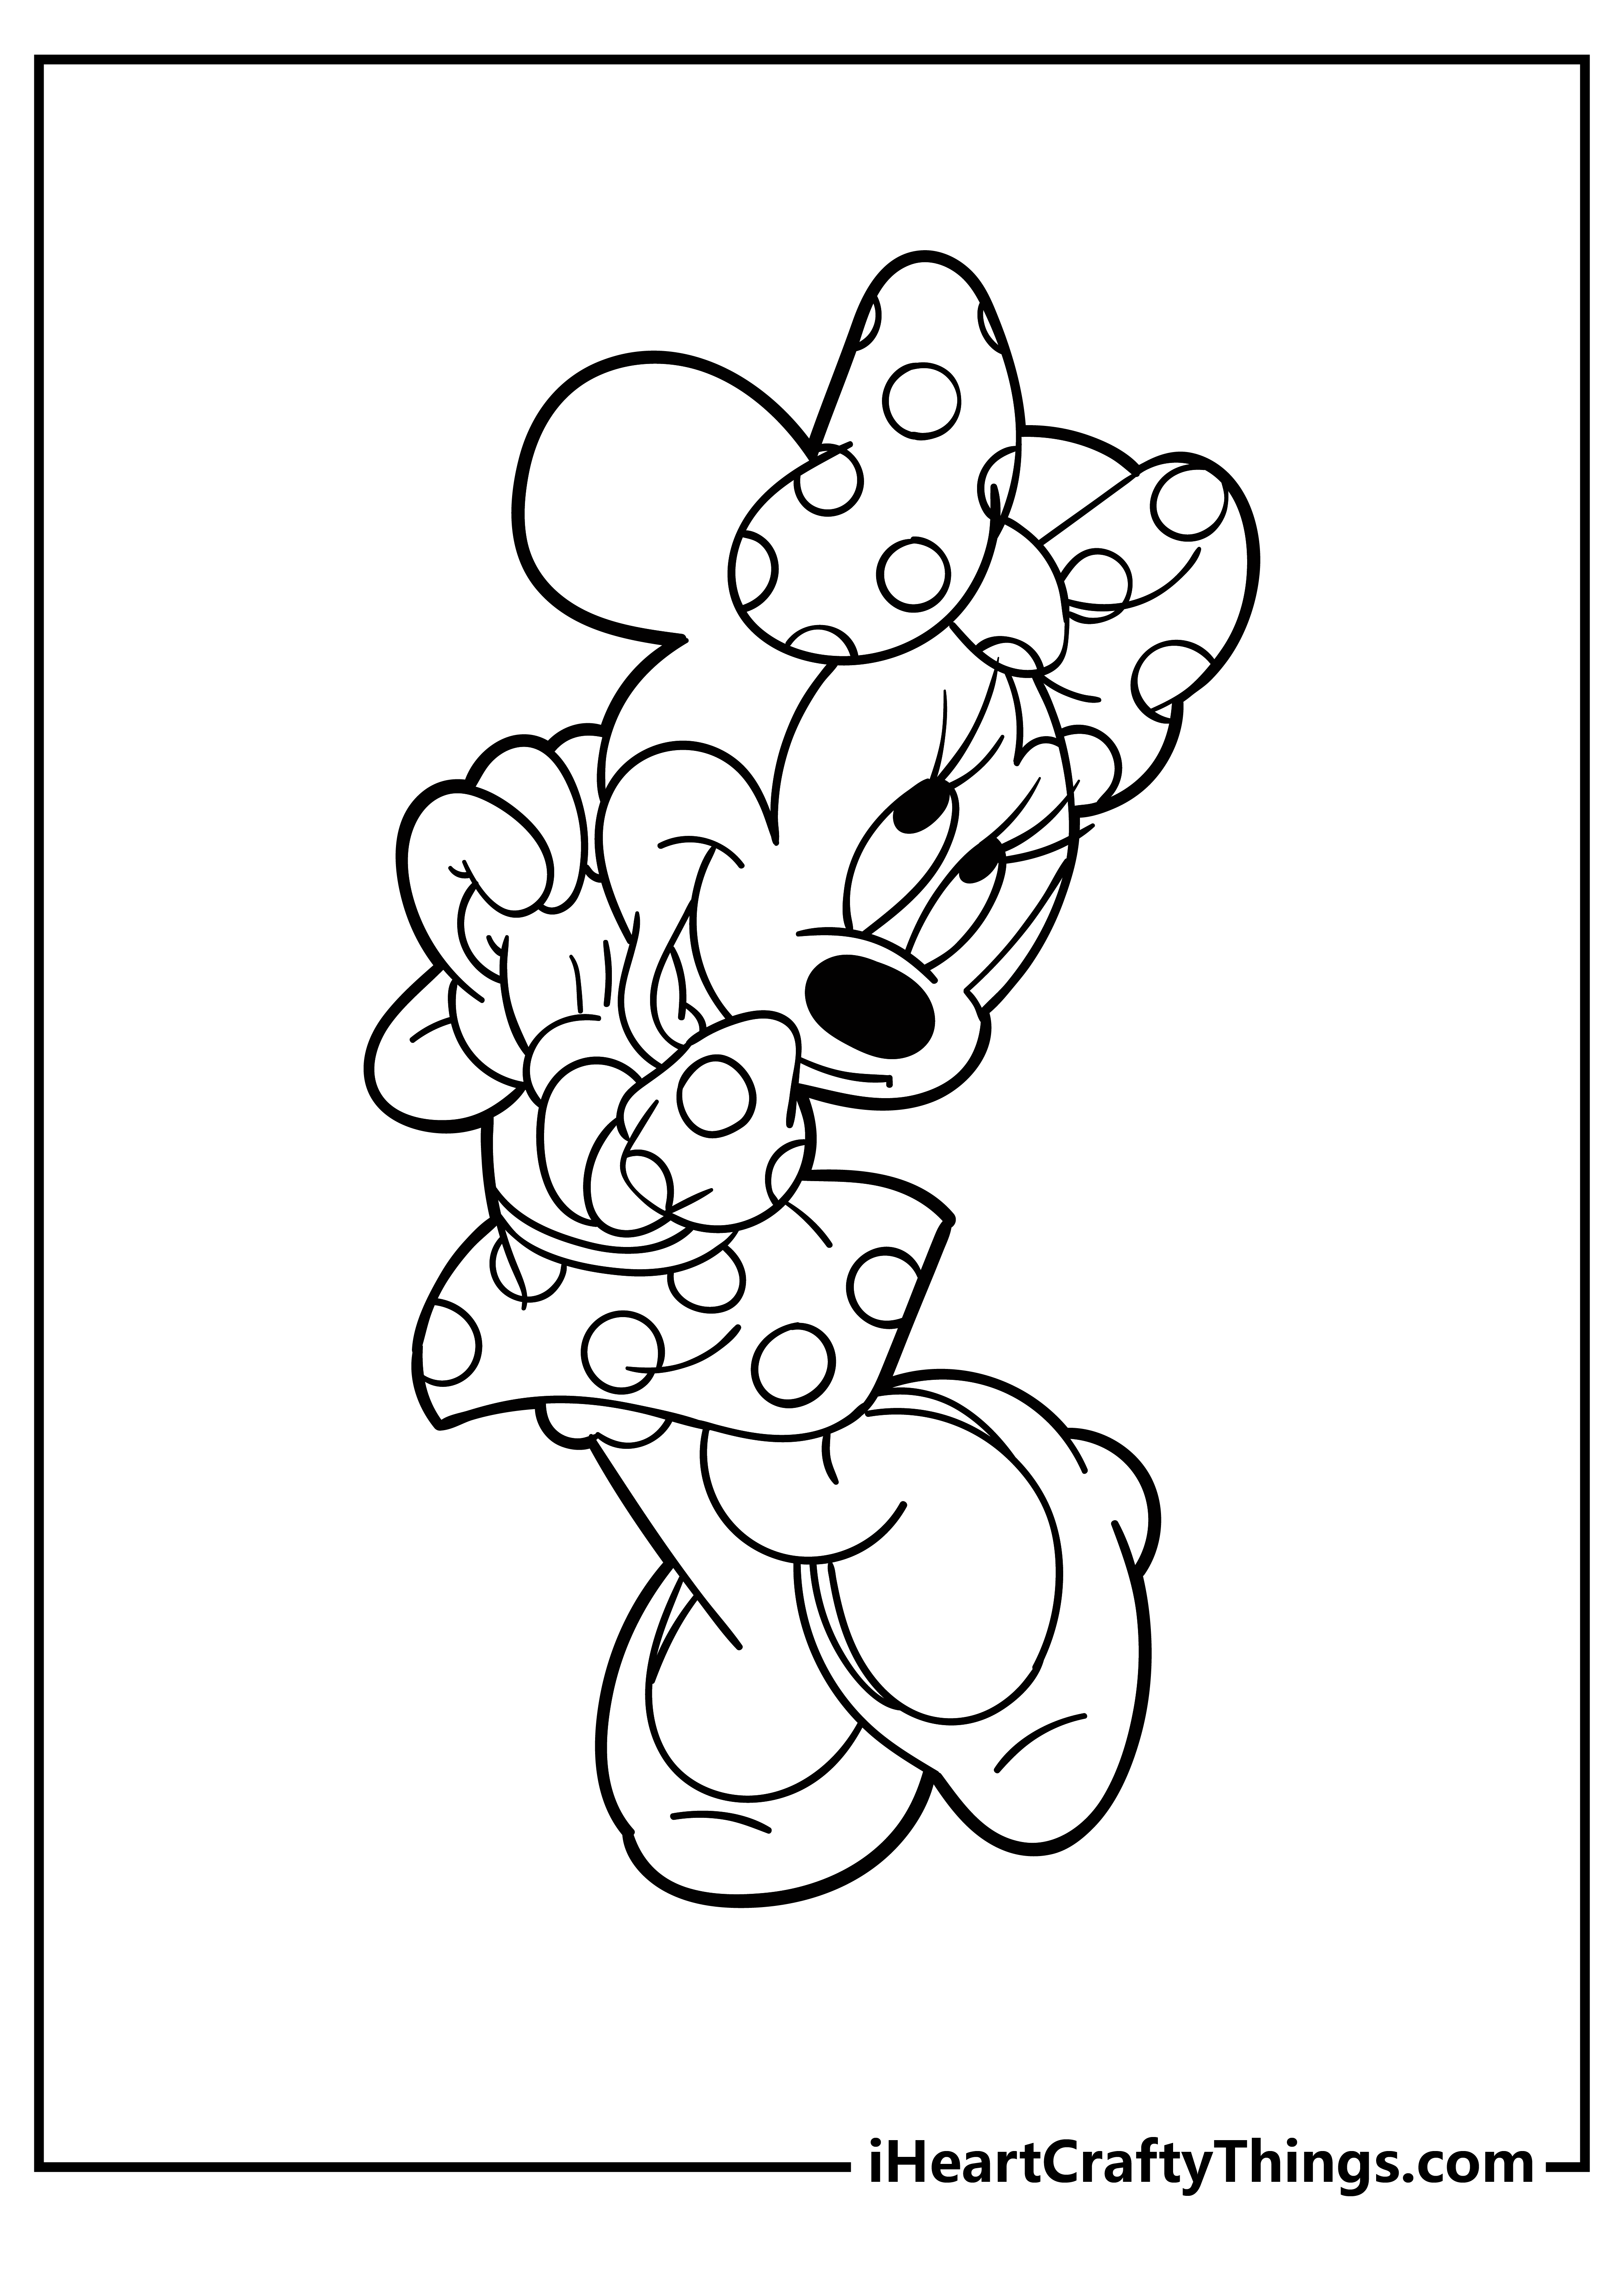 Printable Minnie Mouse Coloring Pages Updated 20